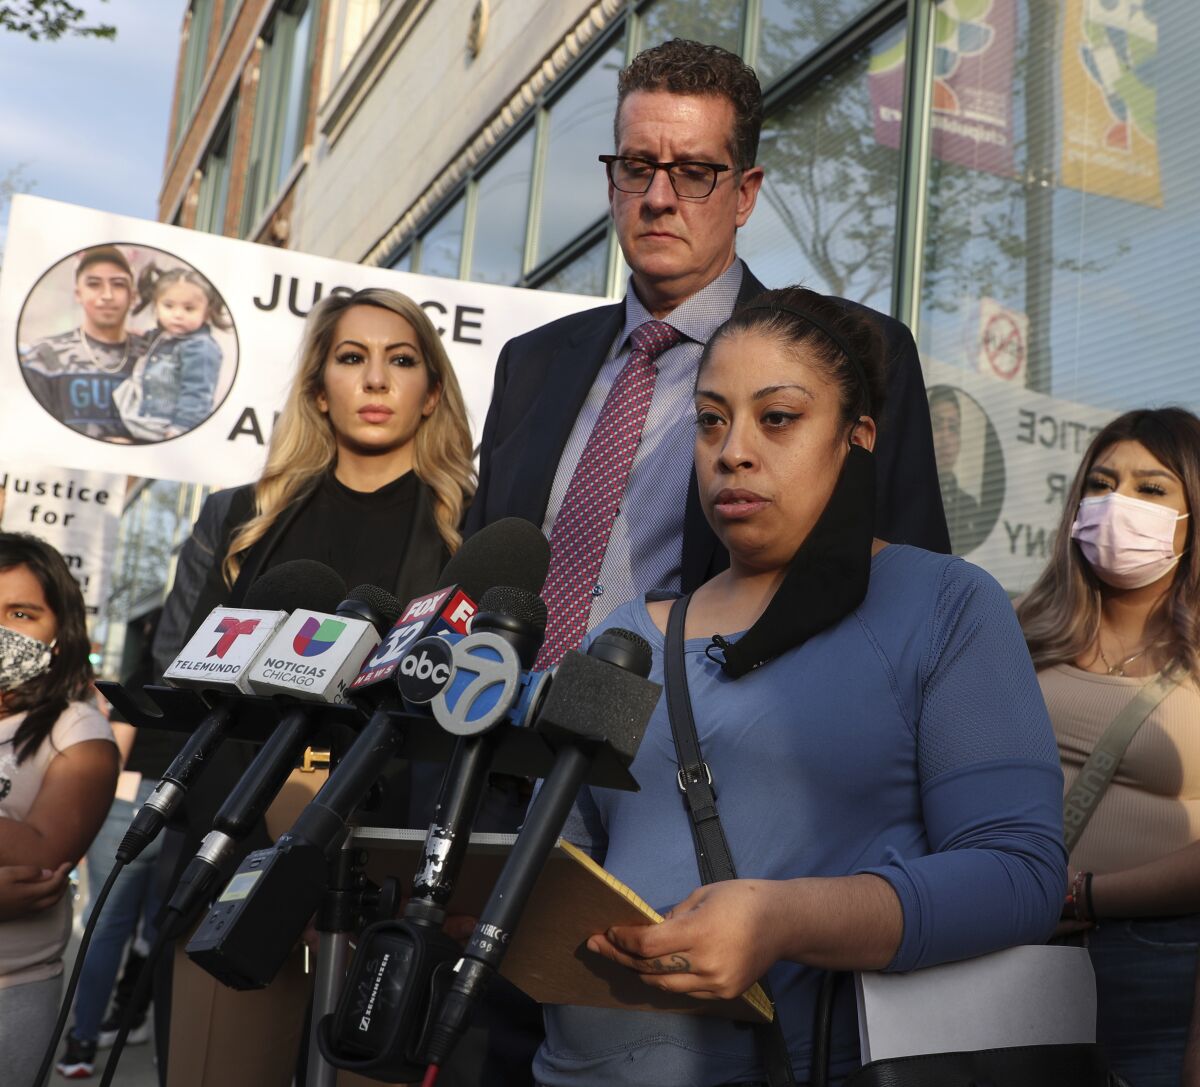 Veronica Alvarez, foreground, the mother of 22-year-old Anthony Alvarez, reads a statement to the media on Tuesday, April 27, 2021, after watching video of her son's fatal shooting. Her attorney Todd Pugh stands behind her. No charges will be filed against the Chicago police officers who fatally shot 13-year-old Adam Toledo and 22-year-old Anthony Alvarez during foot pursuits within days of each other last year, a prosecutor announced Tuesday, March 15, 2022. (Terrence Antonio James/Chicago Tribune via AP)